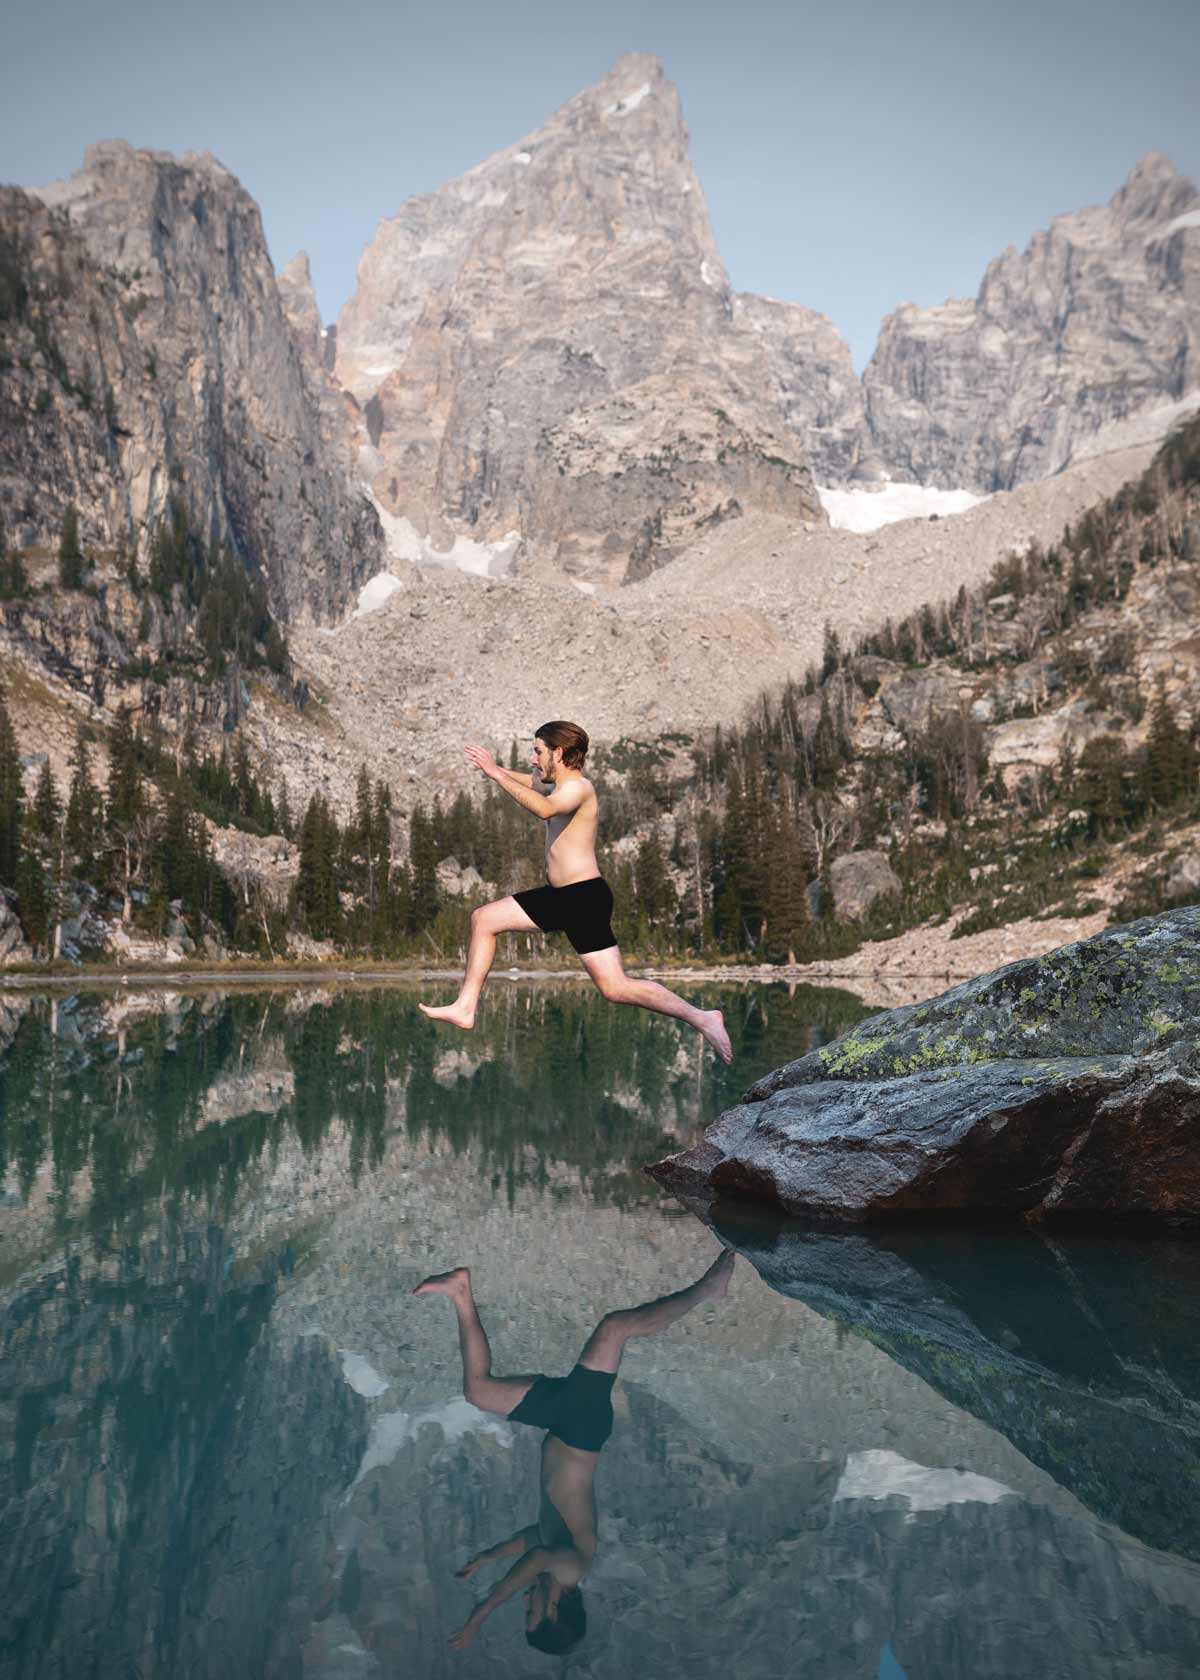 Backpacker jumping in a mountain lake.